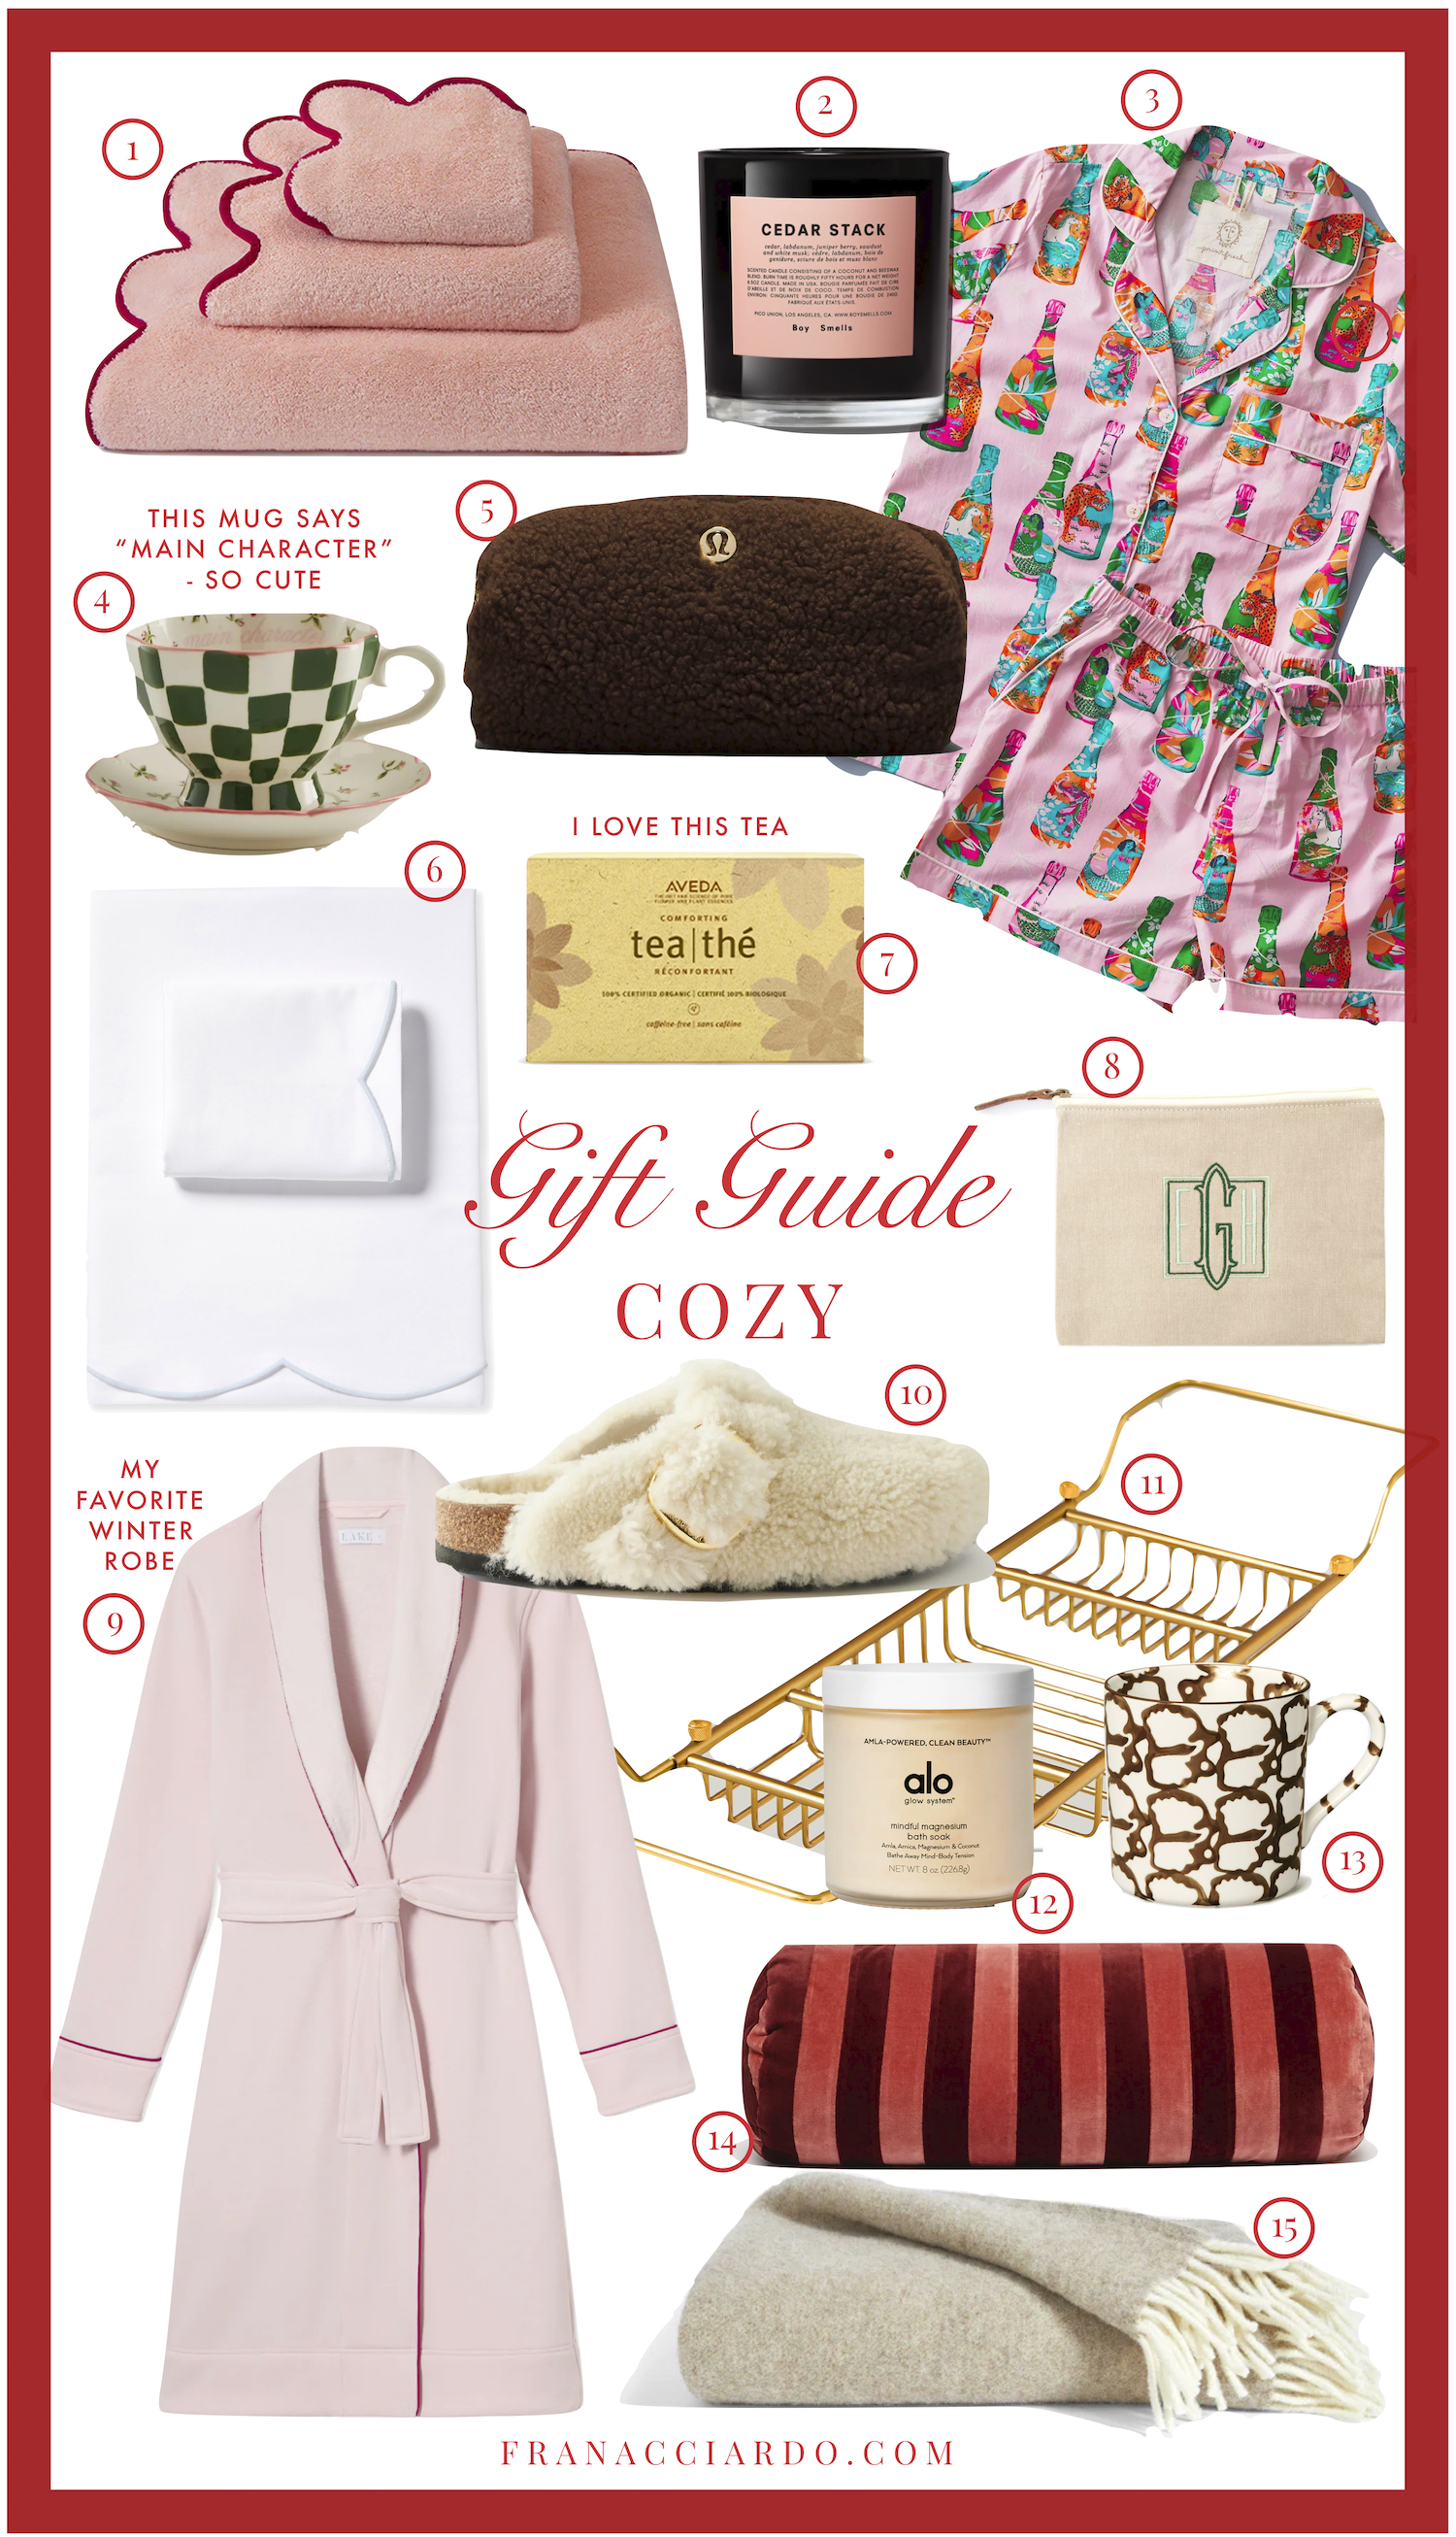 2023 Gift Guide: Cozy Gifts for Her Fran Acciardo